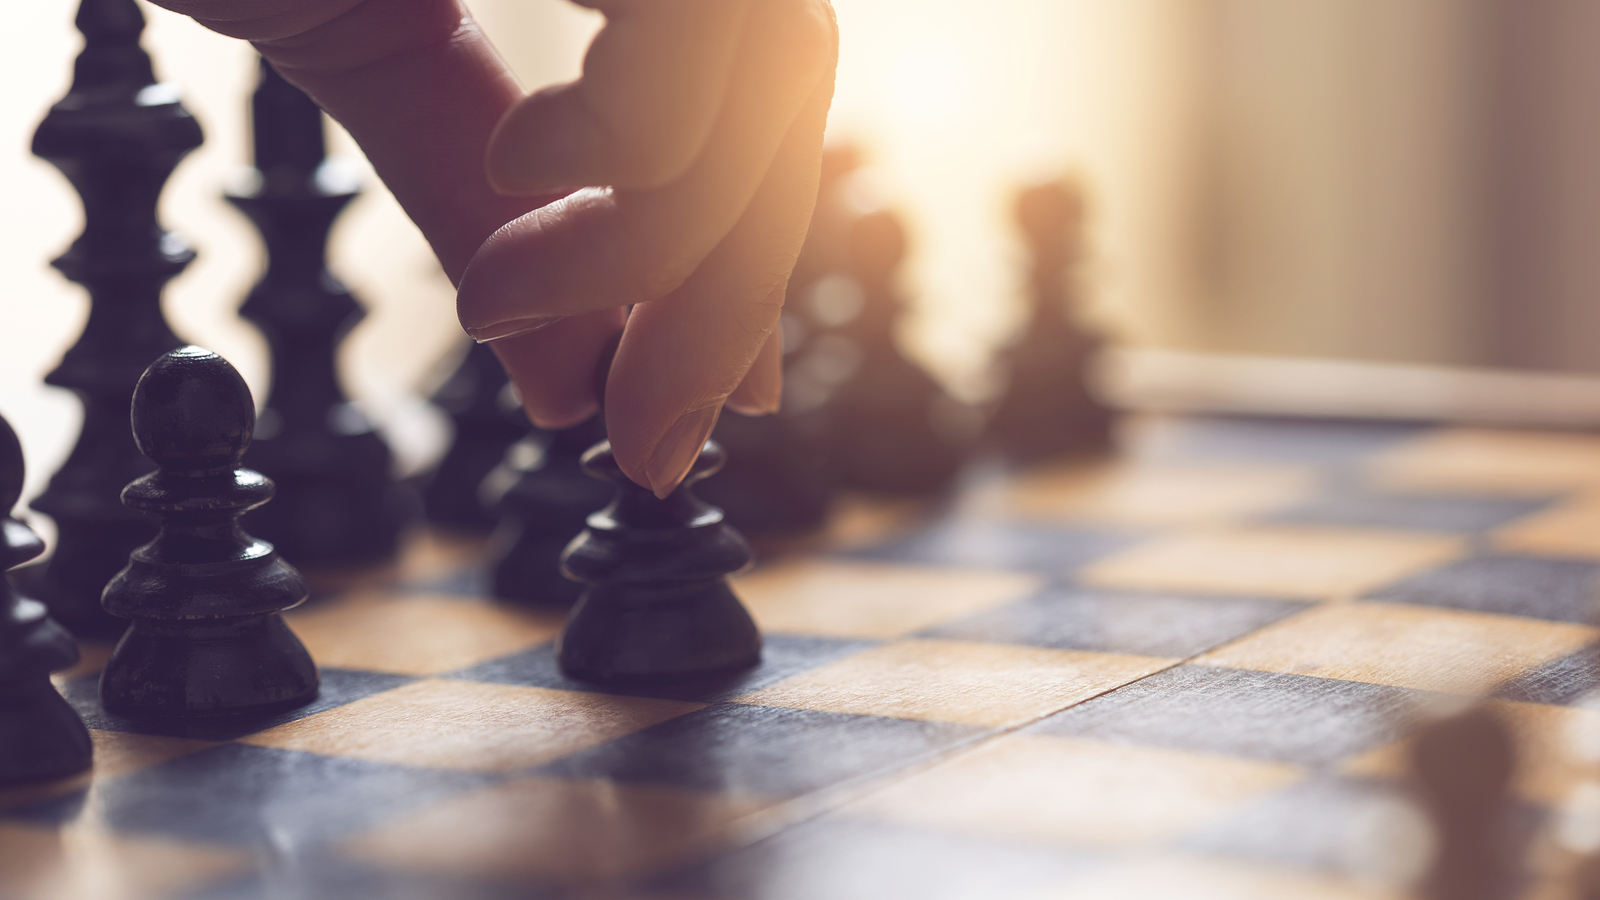 DeepMind Achieves Holy Grail: An AI That Can Master Games Like Chess and Go  Without Human Help - IEEE Spectrum